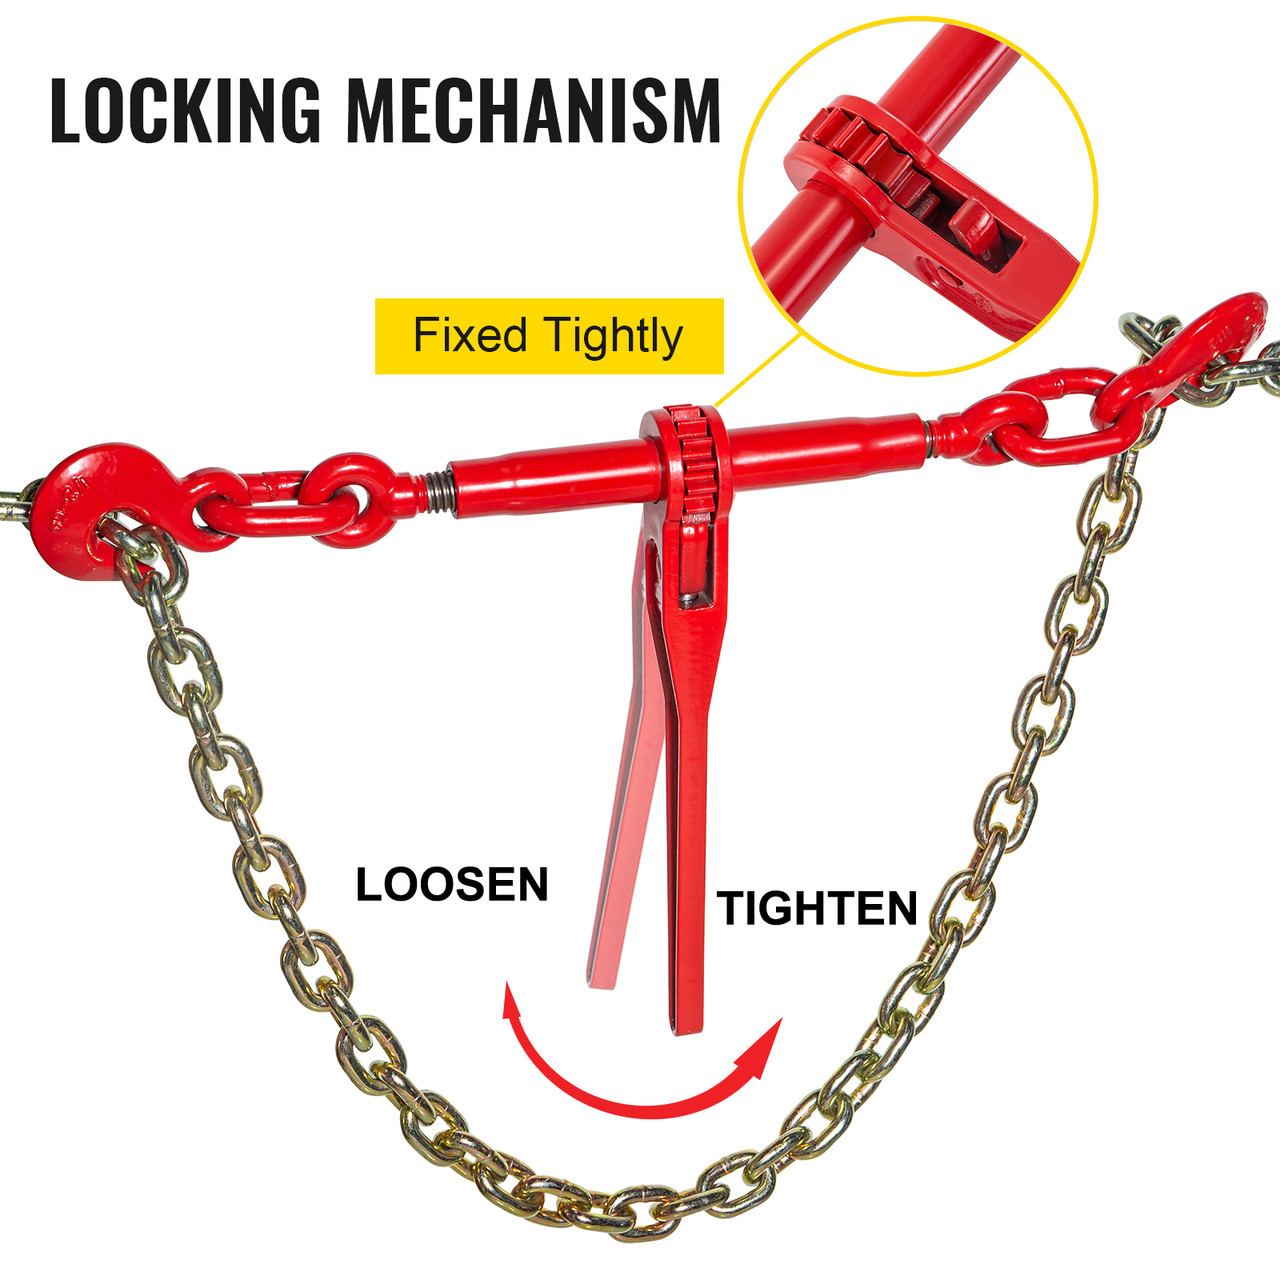 Chain Binder 3/8in x 1/2in, Ratchet Load Binder 9215lbs Capacity, Ratchet Lever Binder w/ G70 Hooks, Adjustable Length, Ratchet Chain Binder for Tie Down, Hauling, Towing, 2 Packs in Red